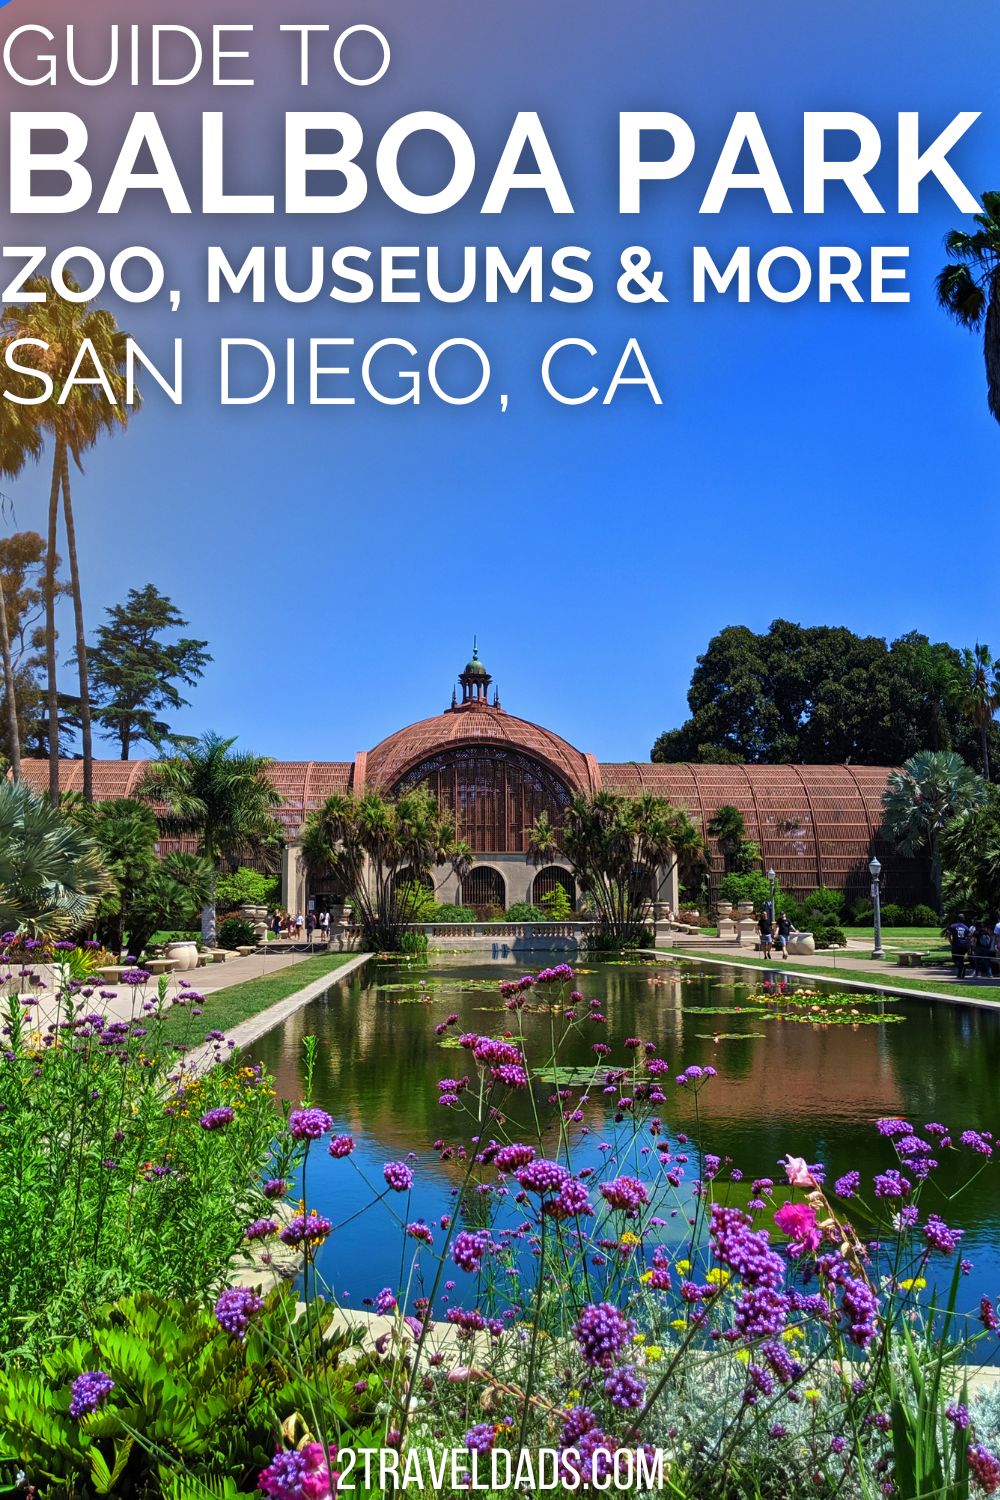 San Diego's Balboa Park is the cultural and activity center of the city. From the San Diego Zoo to art museums and gardens, everything you need to know to enrich your San Diego trip with Balboa Park.